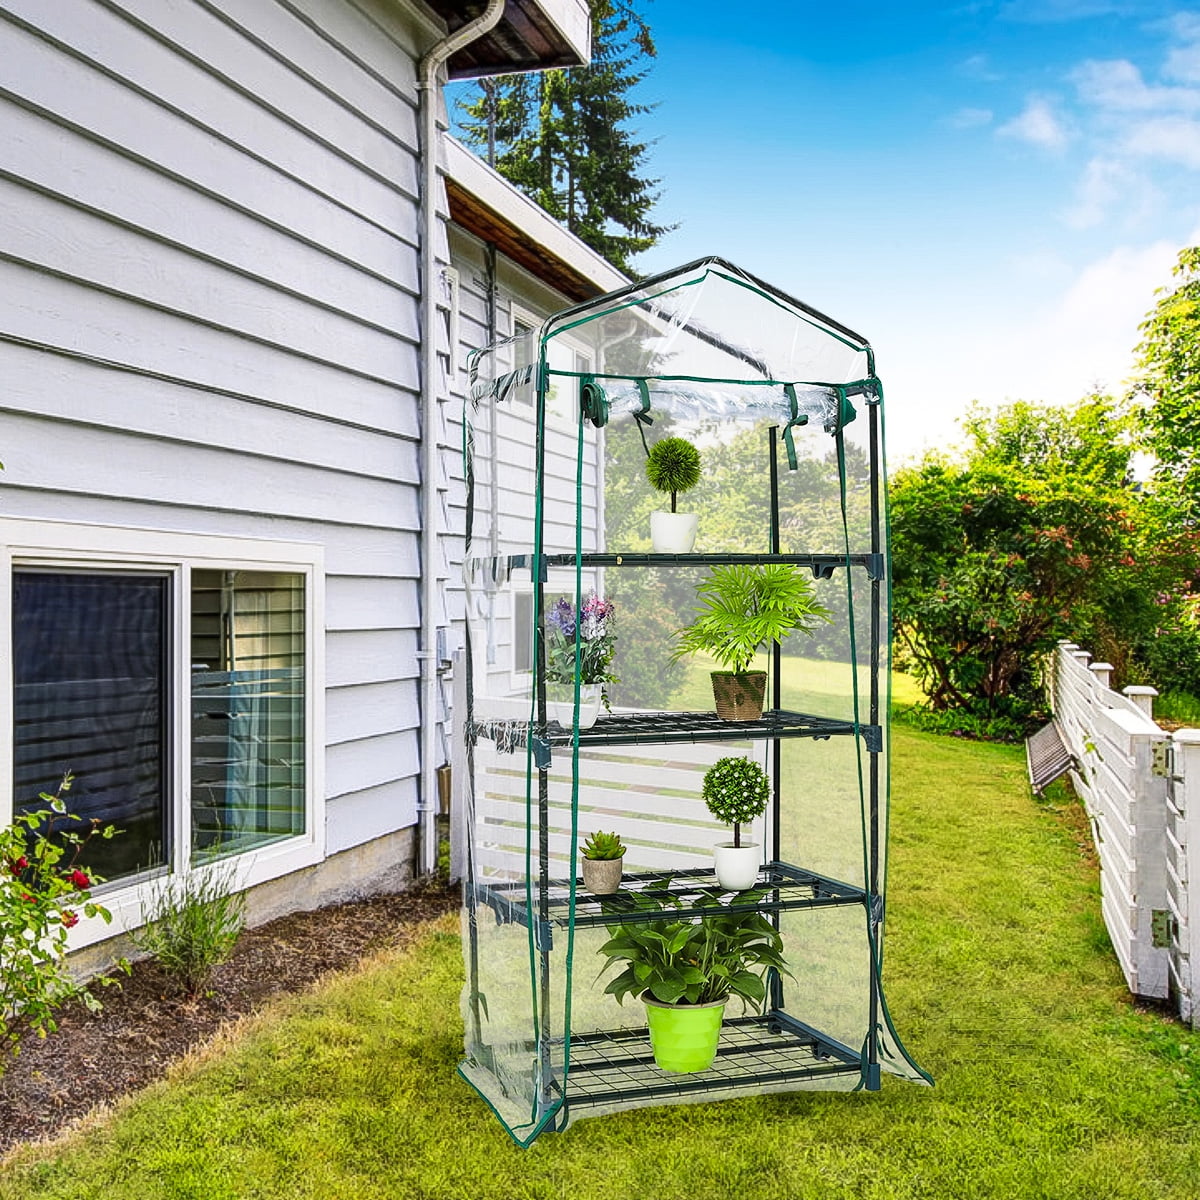 AUEDW Mini Greenhouse 4 Shelves Indoor/Outdoor Greenhouse with Zippered